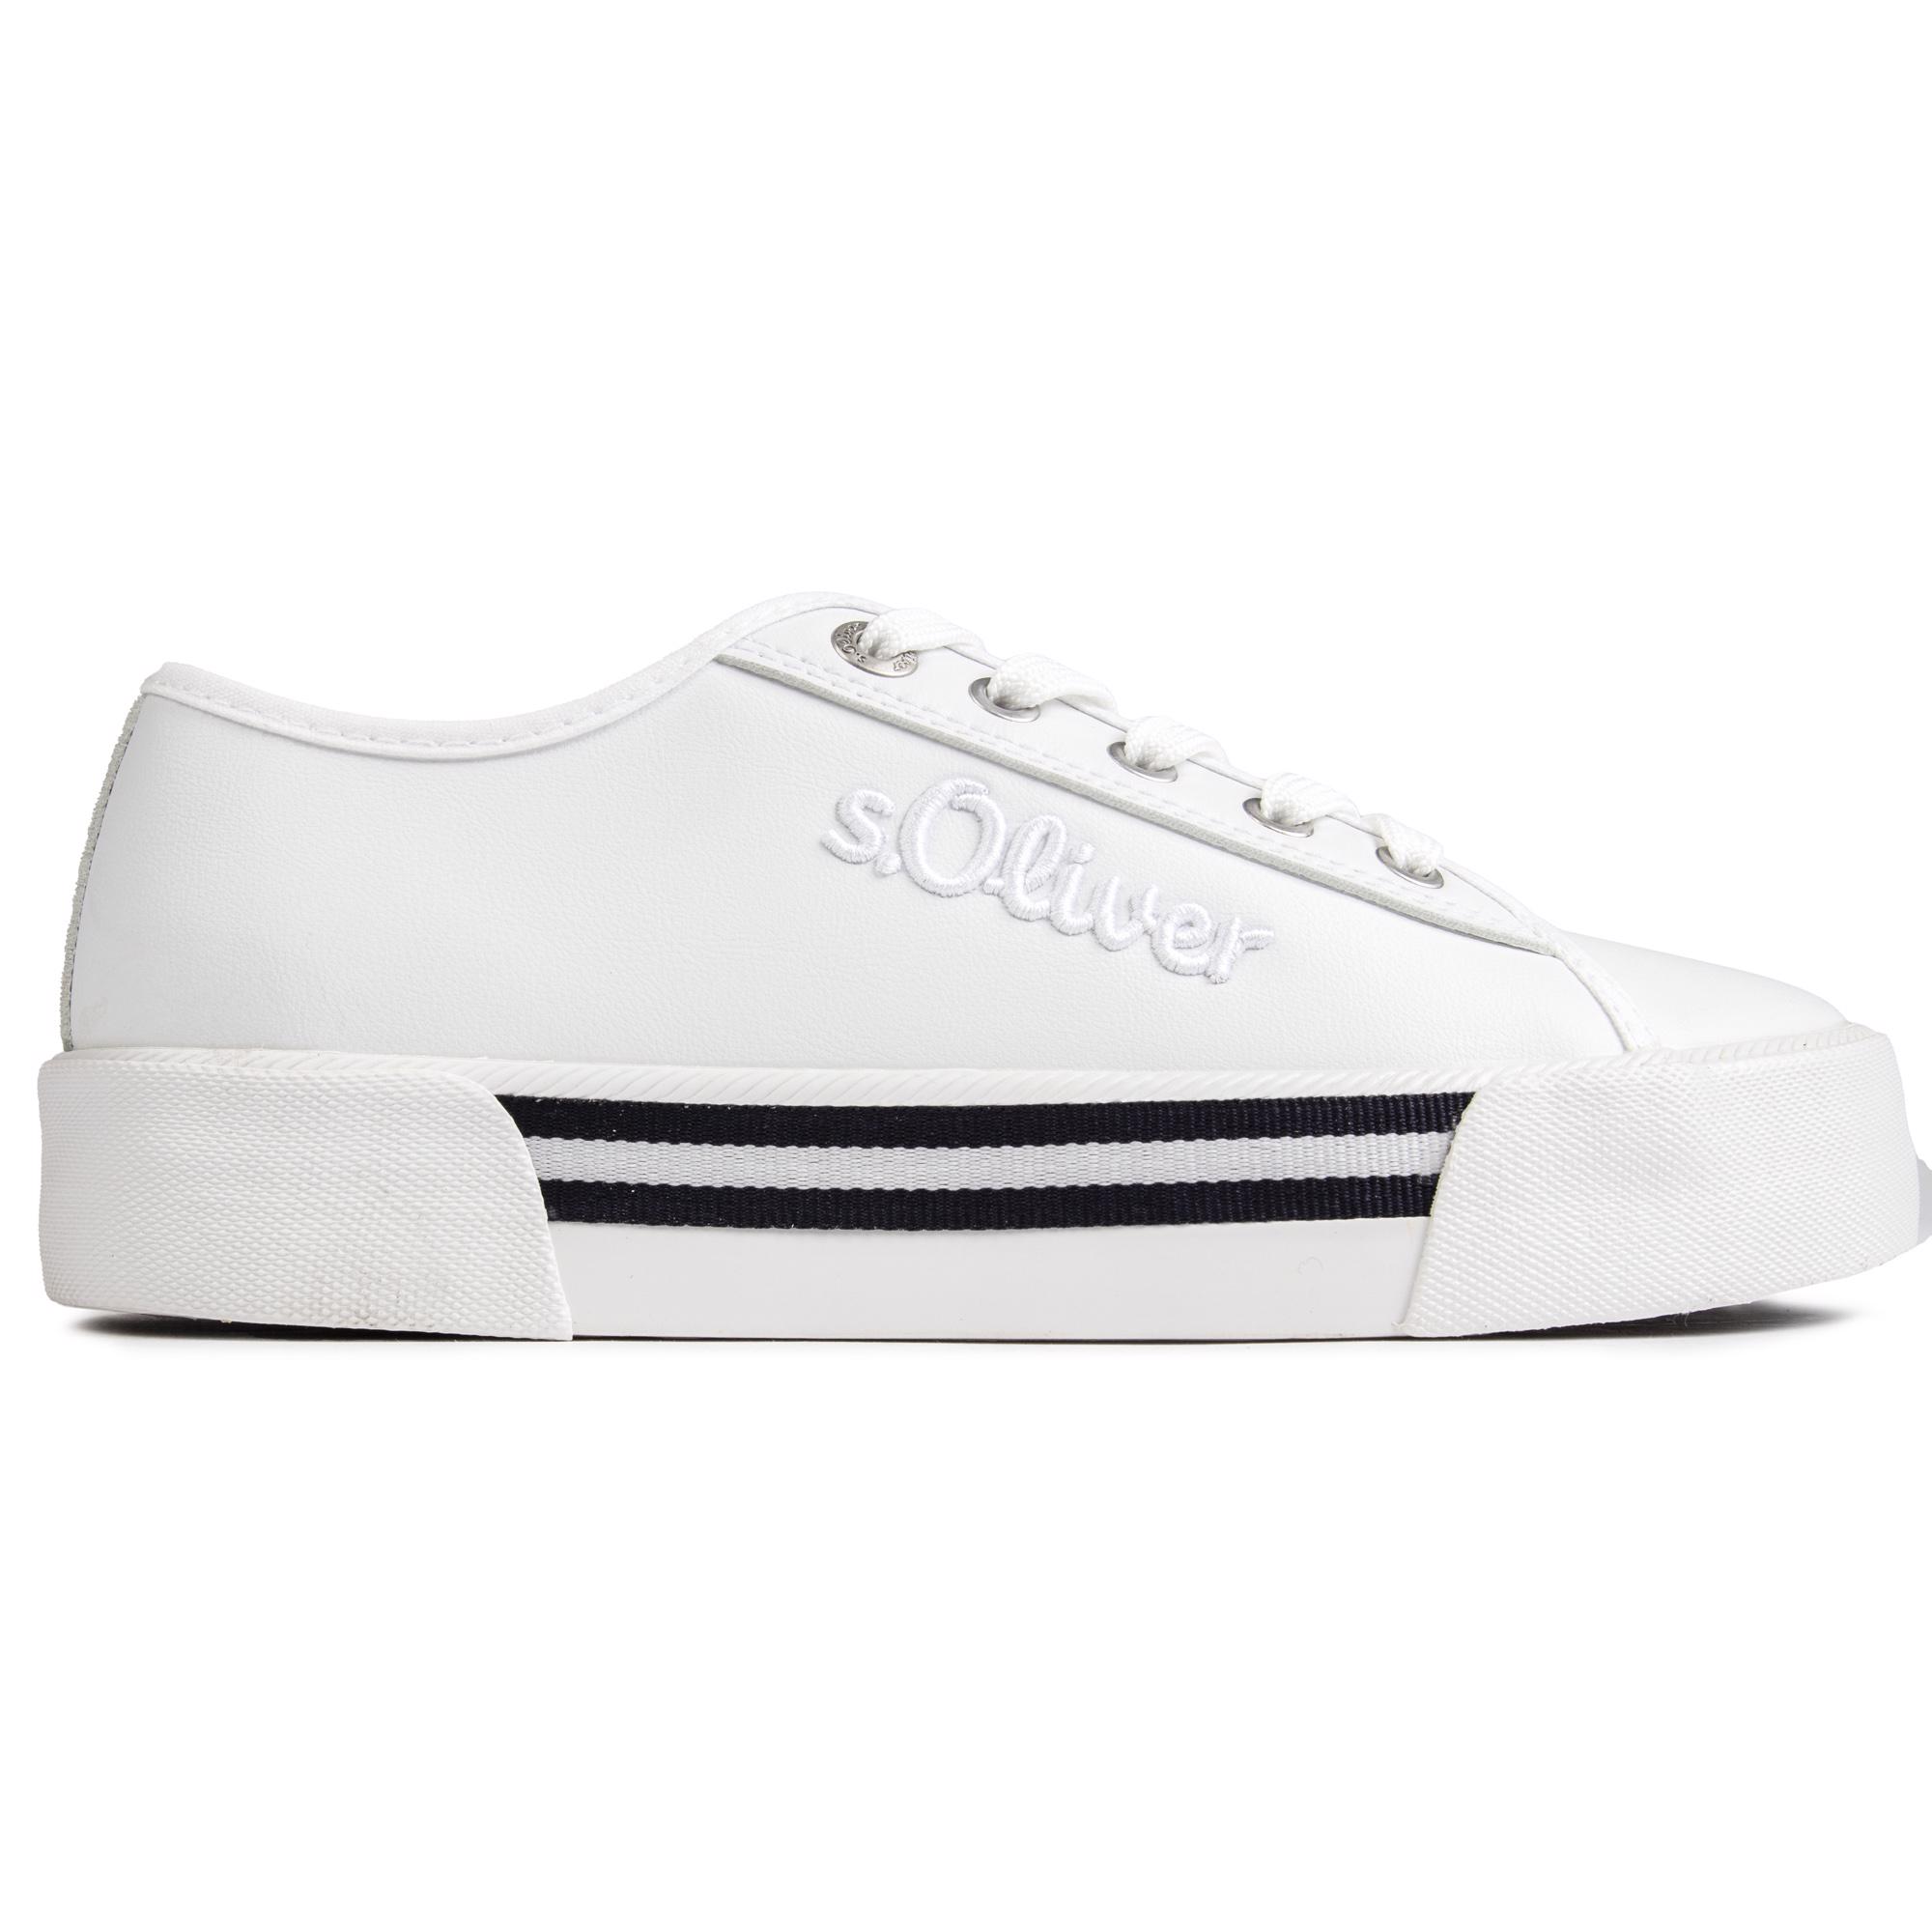 S OLIVER Womens 23678 Platforms Trainers White